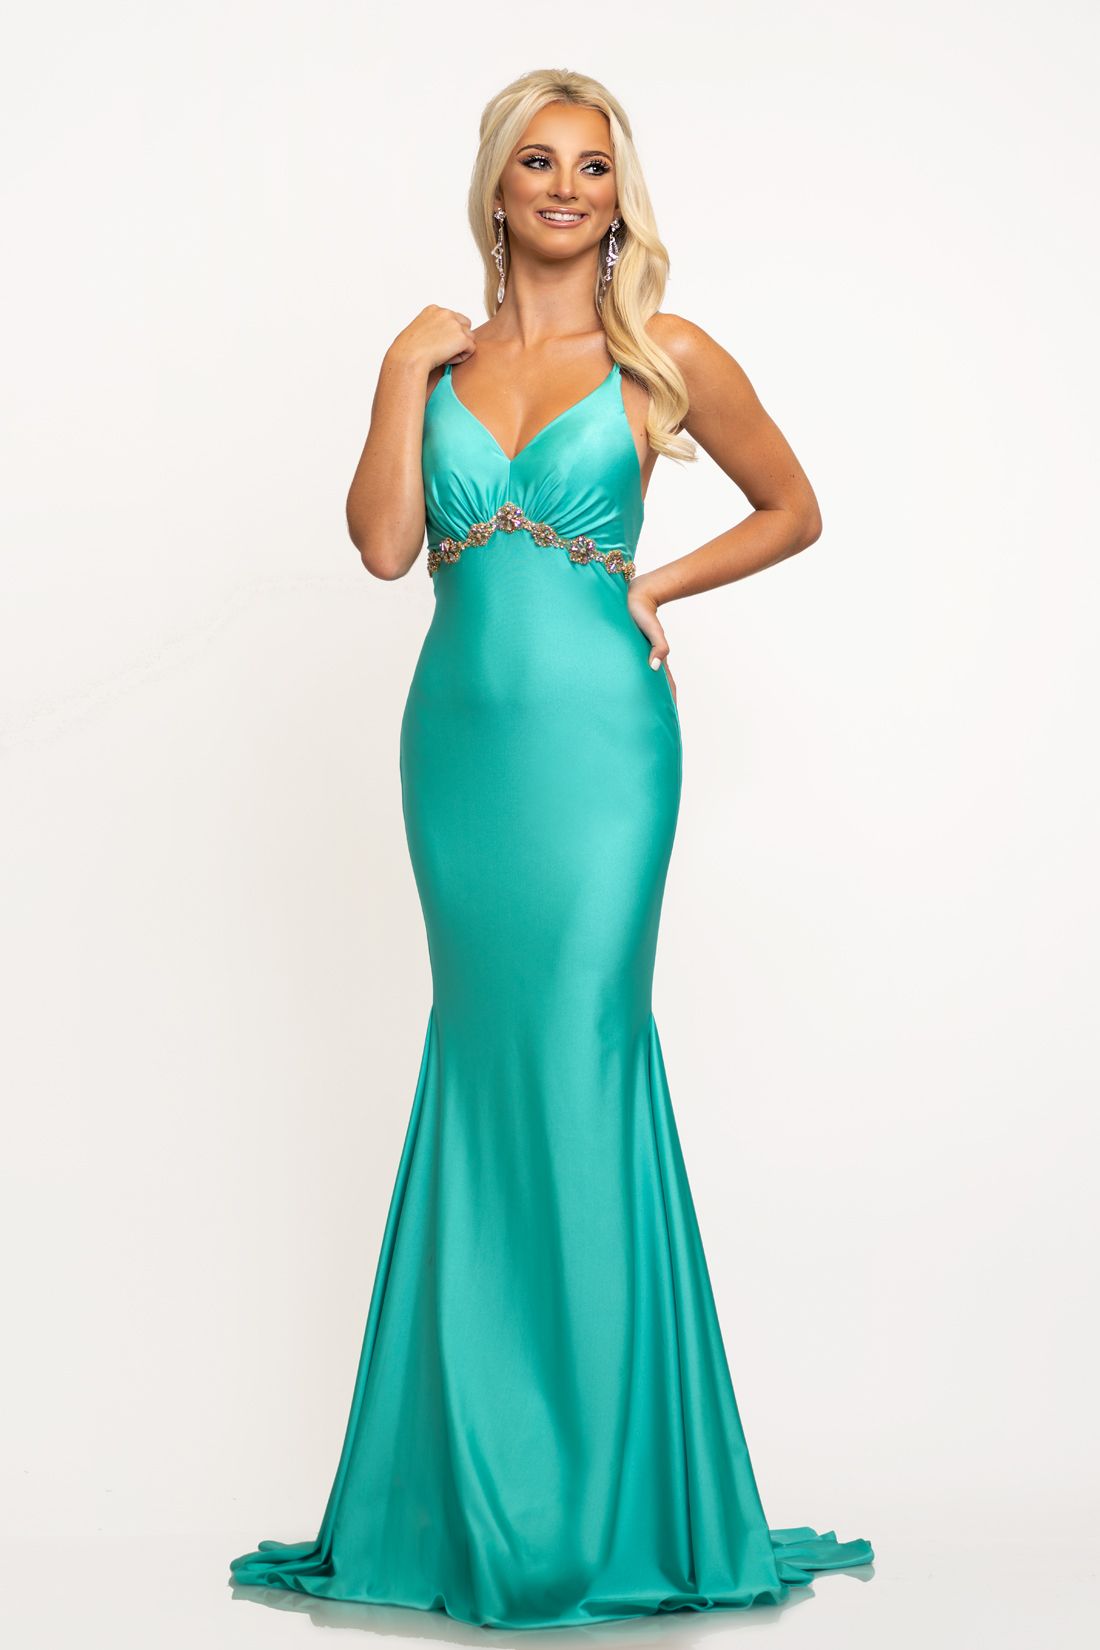 Johnathan Kayne 2210 This is a v neckline open back fitted stretch lyrca prom dress with a high waistline trimmed in embellishments.  The pageant gown is open in the back and the double spaghetti straps cross several times in the back and the long mermaid skirt flows into a sweeping train. A very nice smooth evening gown.  Colors Navy, Seafoam   Sizes 00, 0, 2, 4, 6, 8, 10, 12, 14, 16 